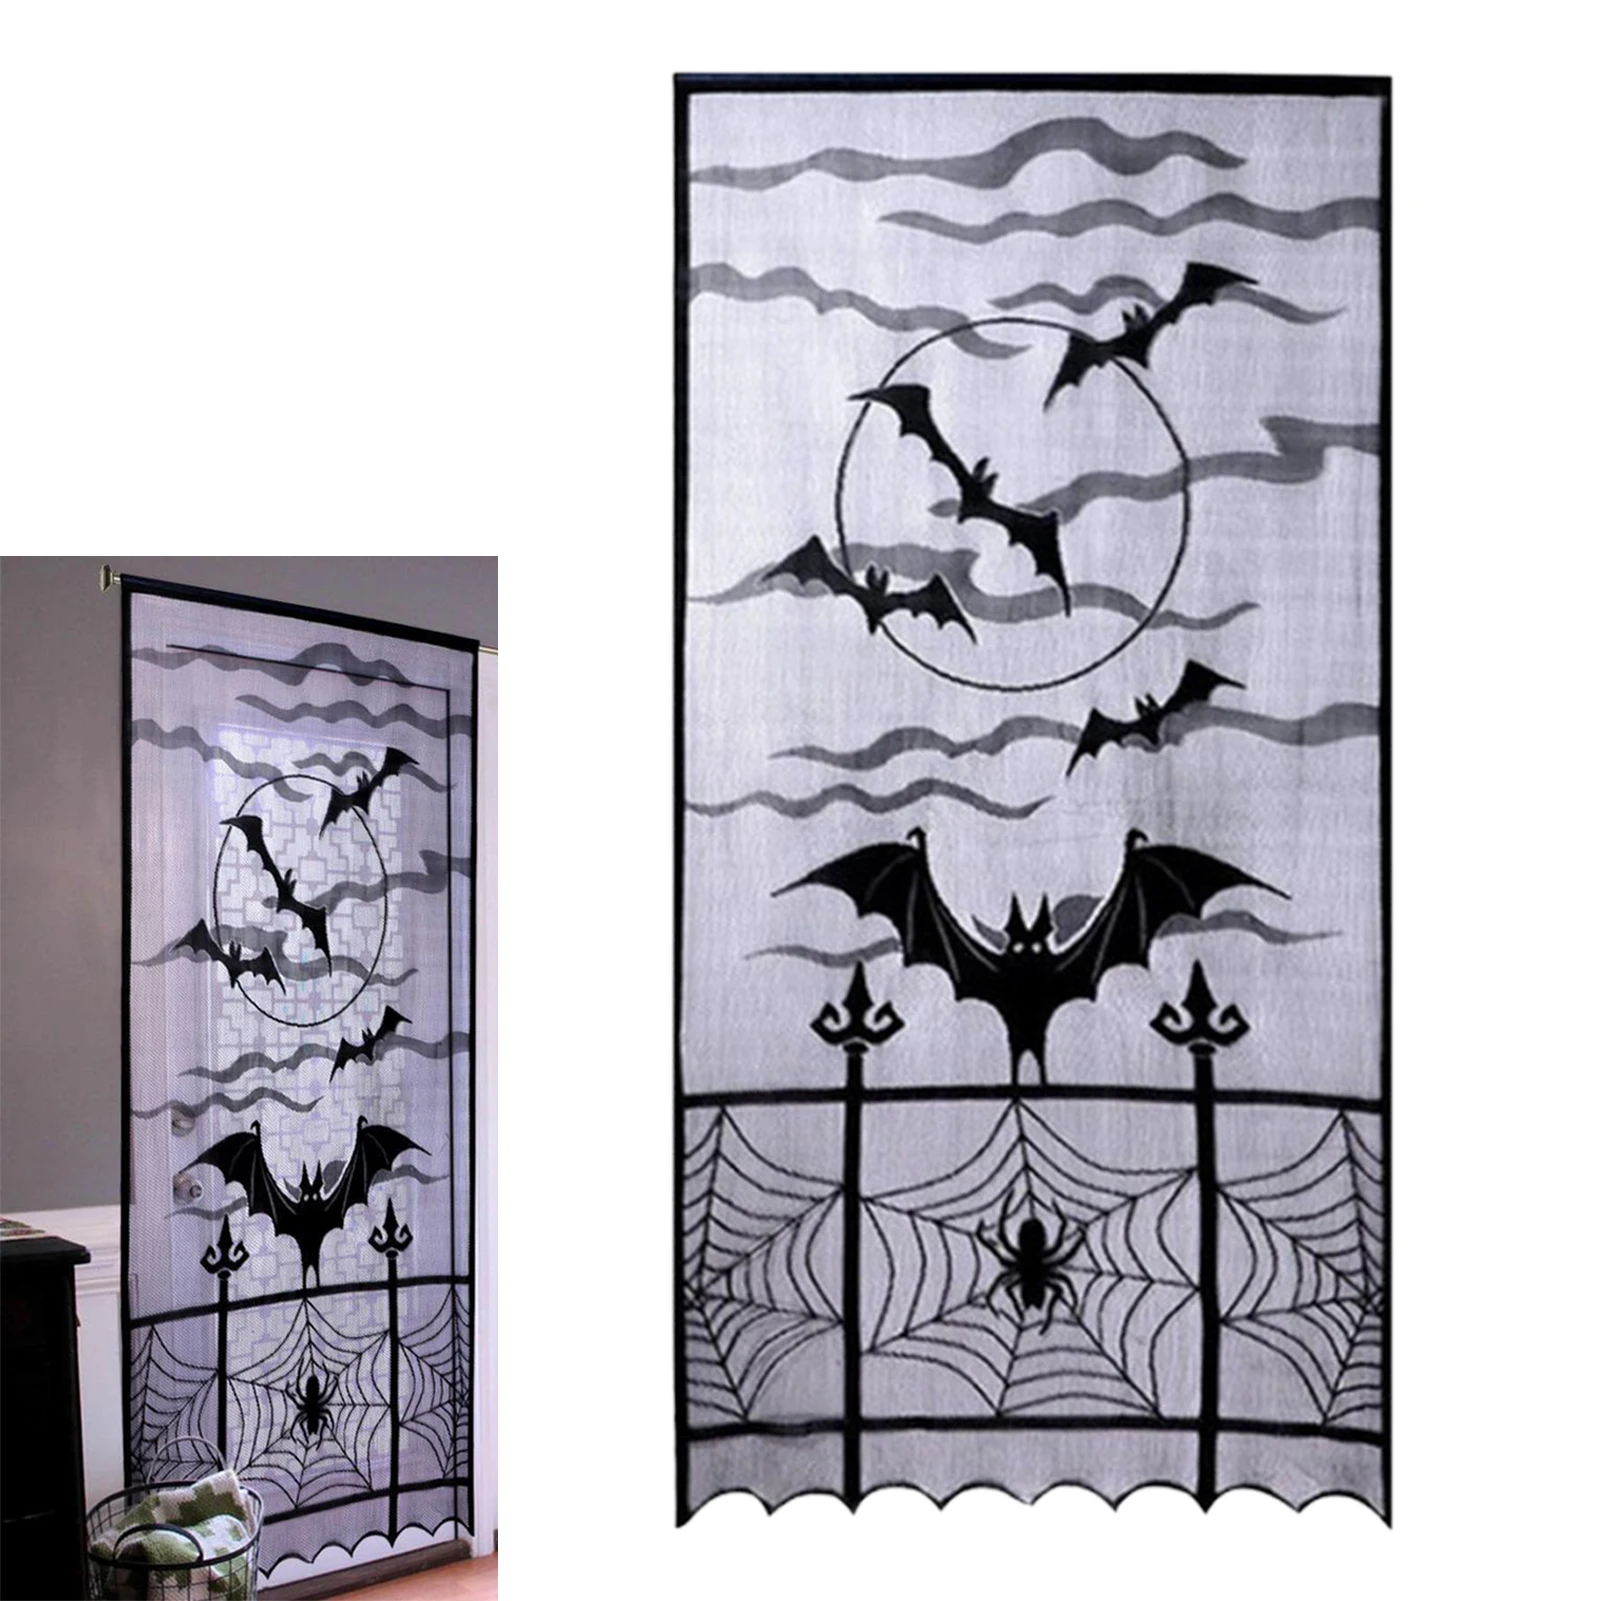 

Spider Bat Curtains Halloween Curtains With Black Bats And Spiders 40 X 82 Inch Halloween Lampshade Fireplace Cloth Decor